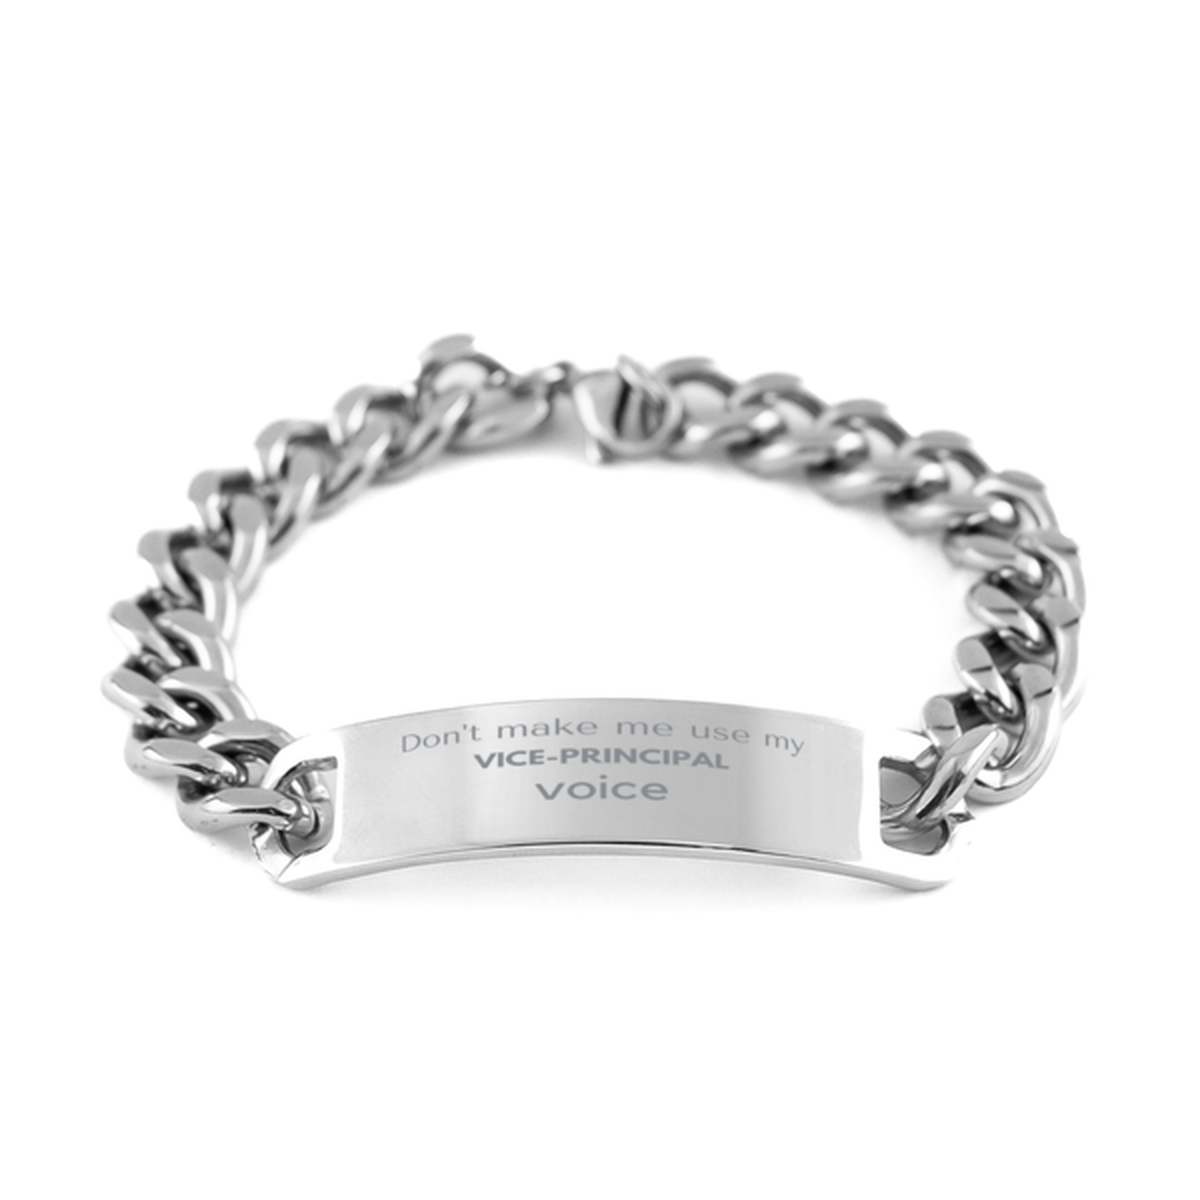 Don't make me use my Vice-principal voice, Sarcasm Vice-principal Gifts, Christmas Vice-principal Cuban Chain Stainless Steel Bracelet Birthday Unique Gifts For Vice-principal Coworkers, Men, Women, Colleague, Friends